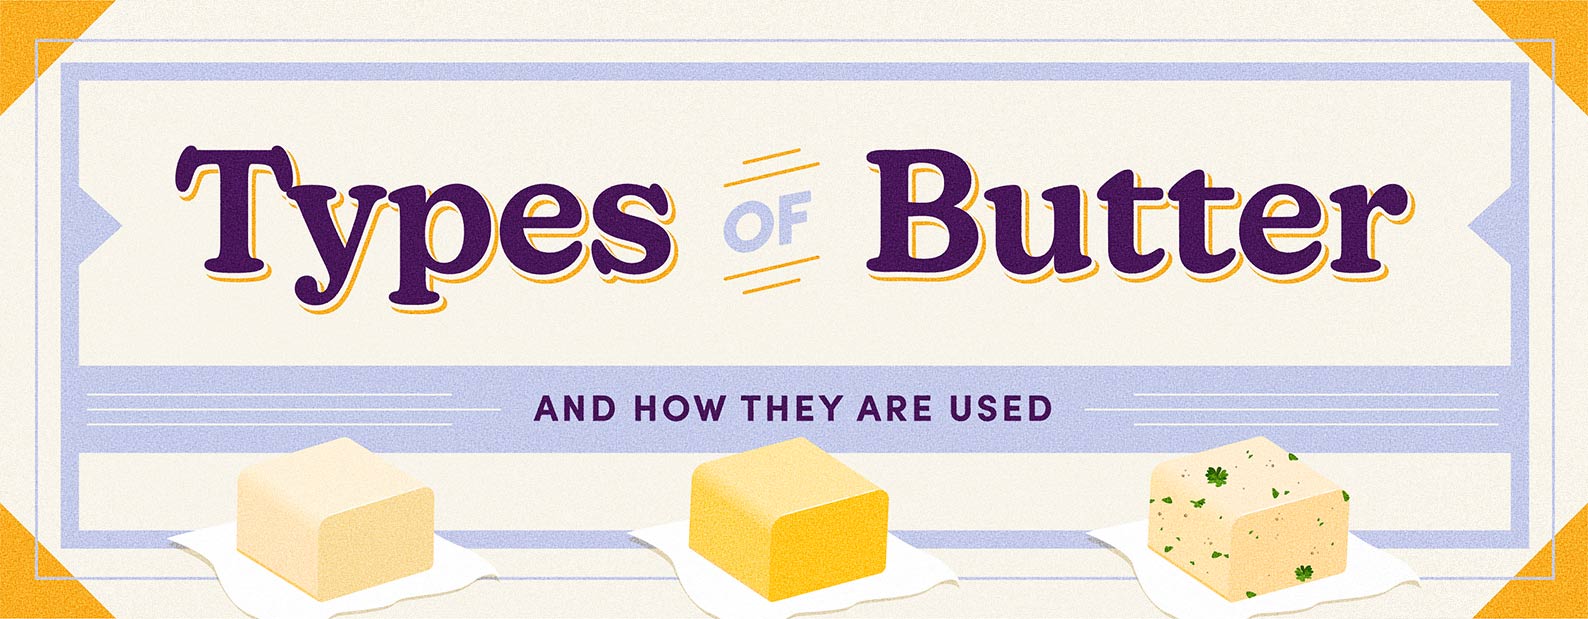 Types of Butter 